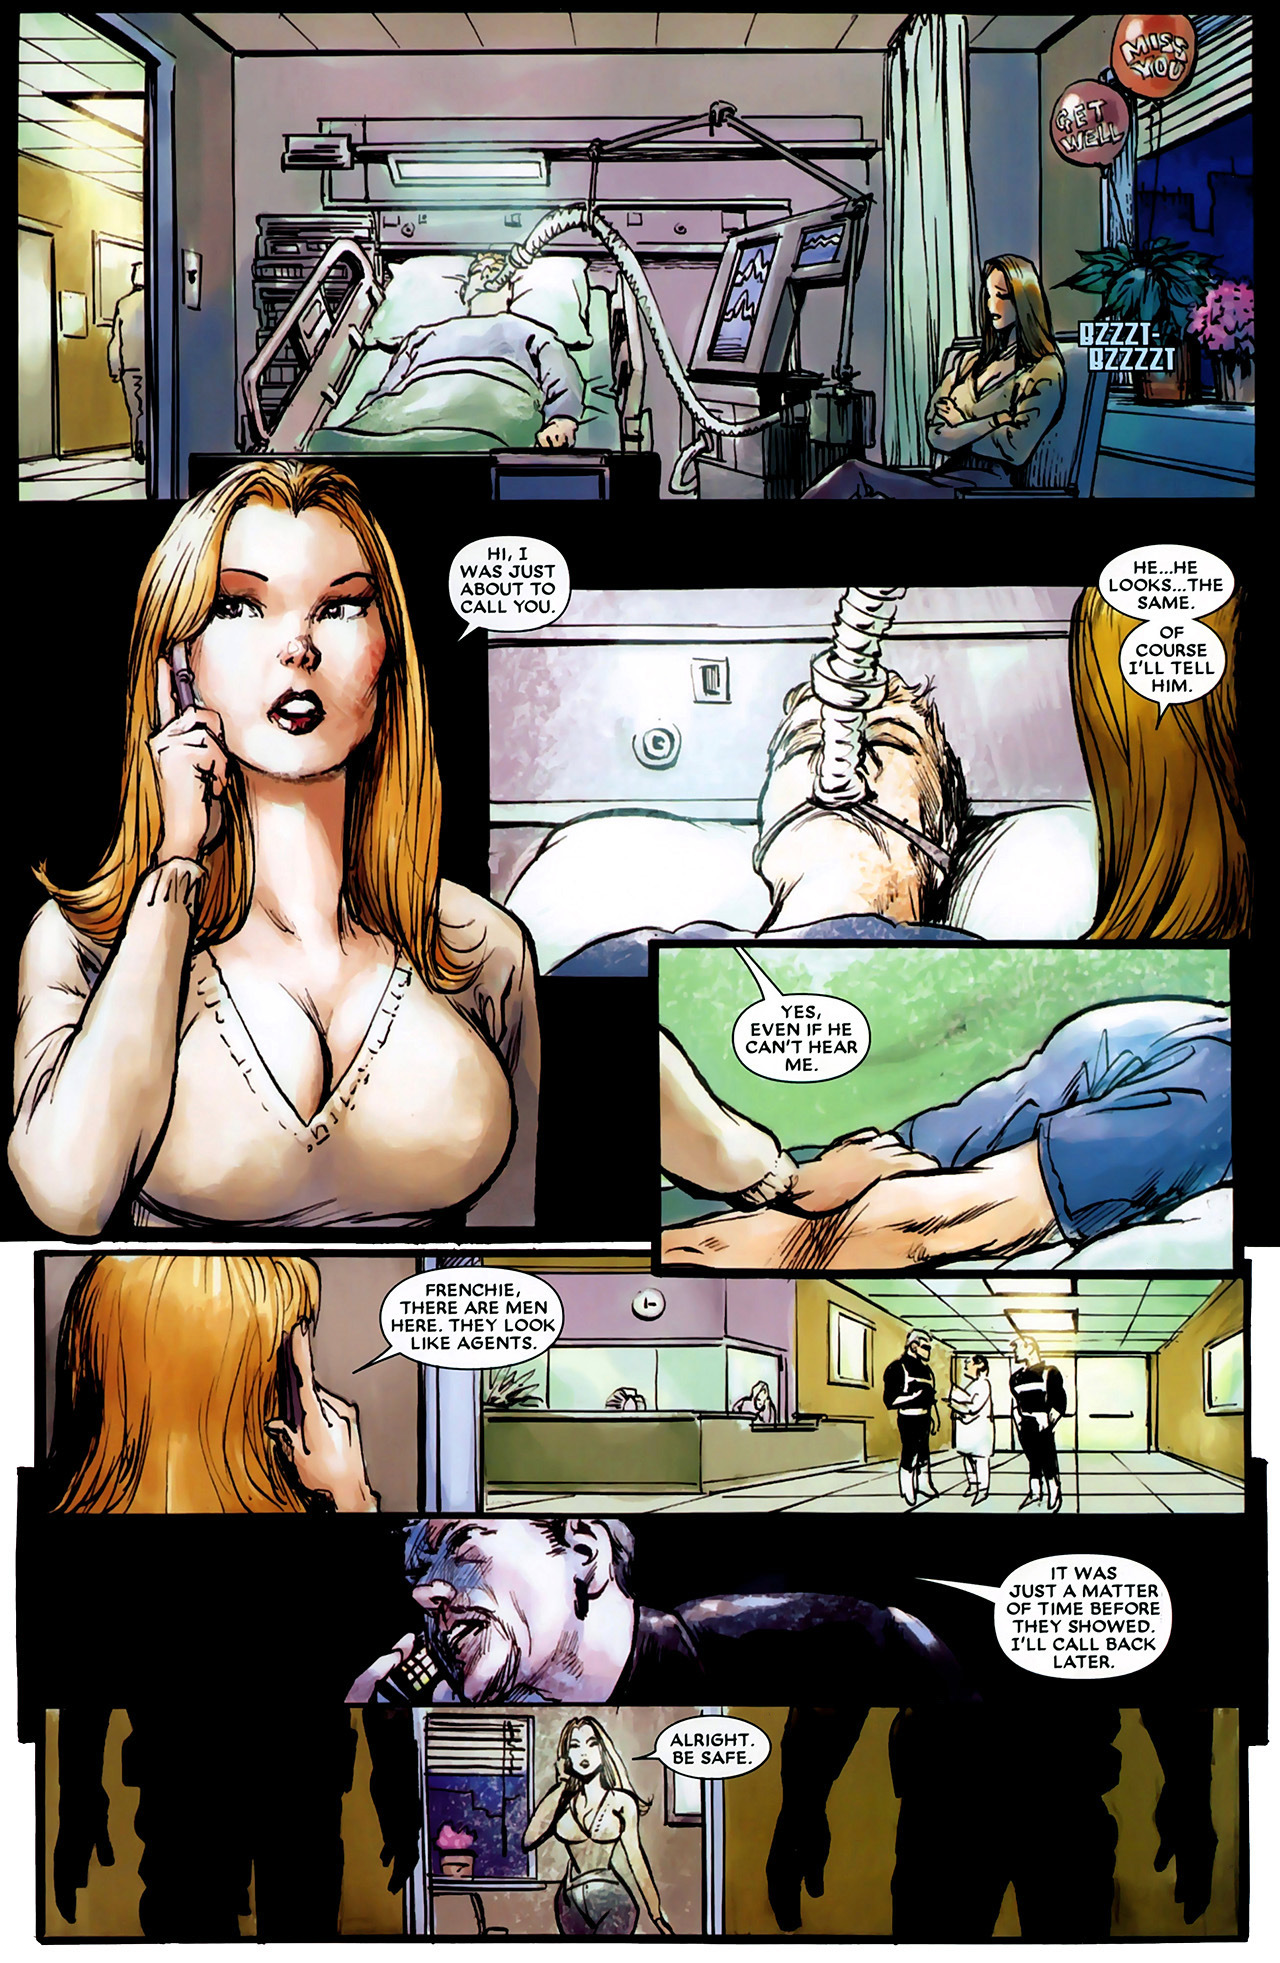 Moon Knight #24 - The Death of Marc Spector, Part 4